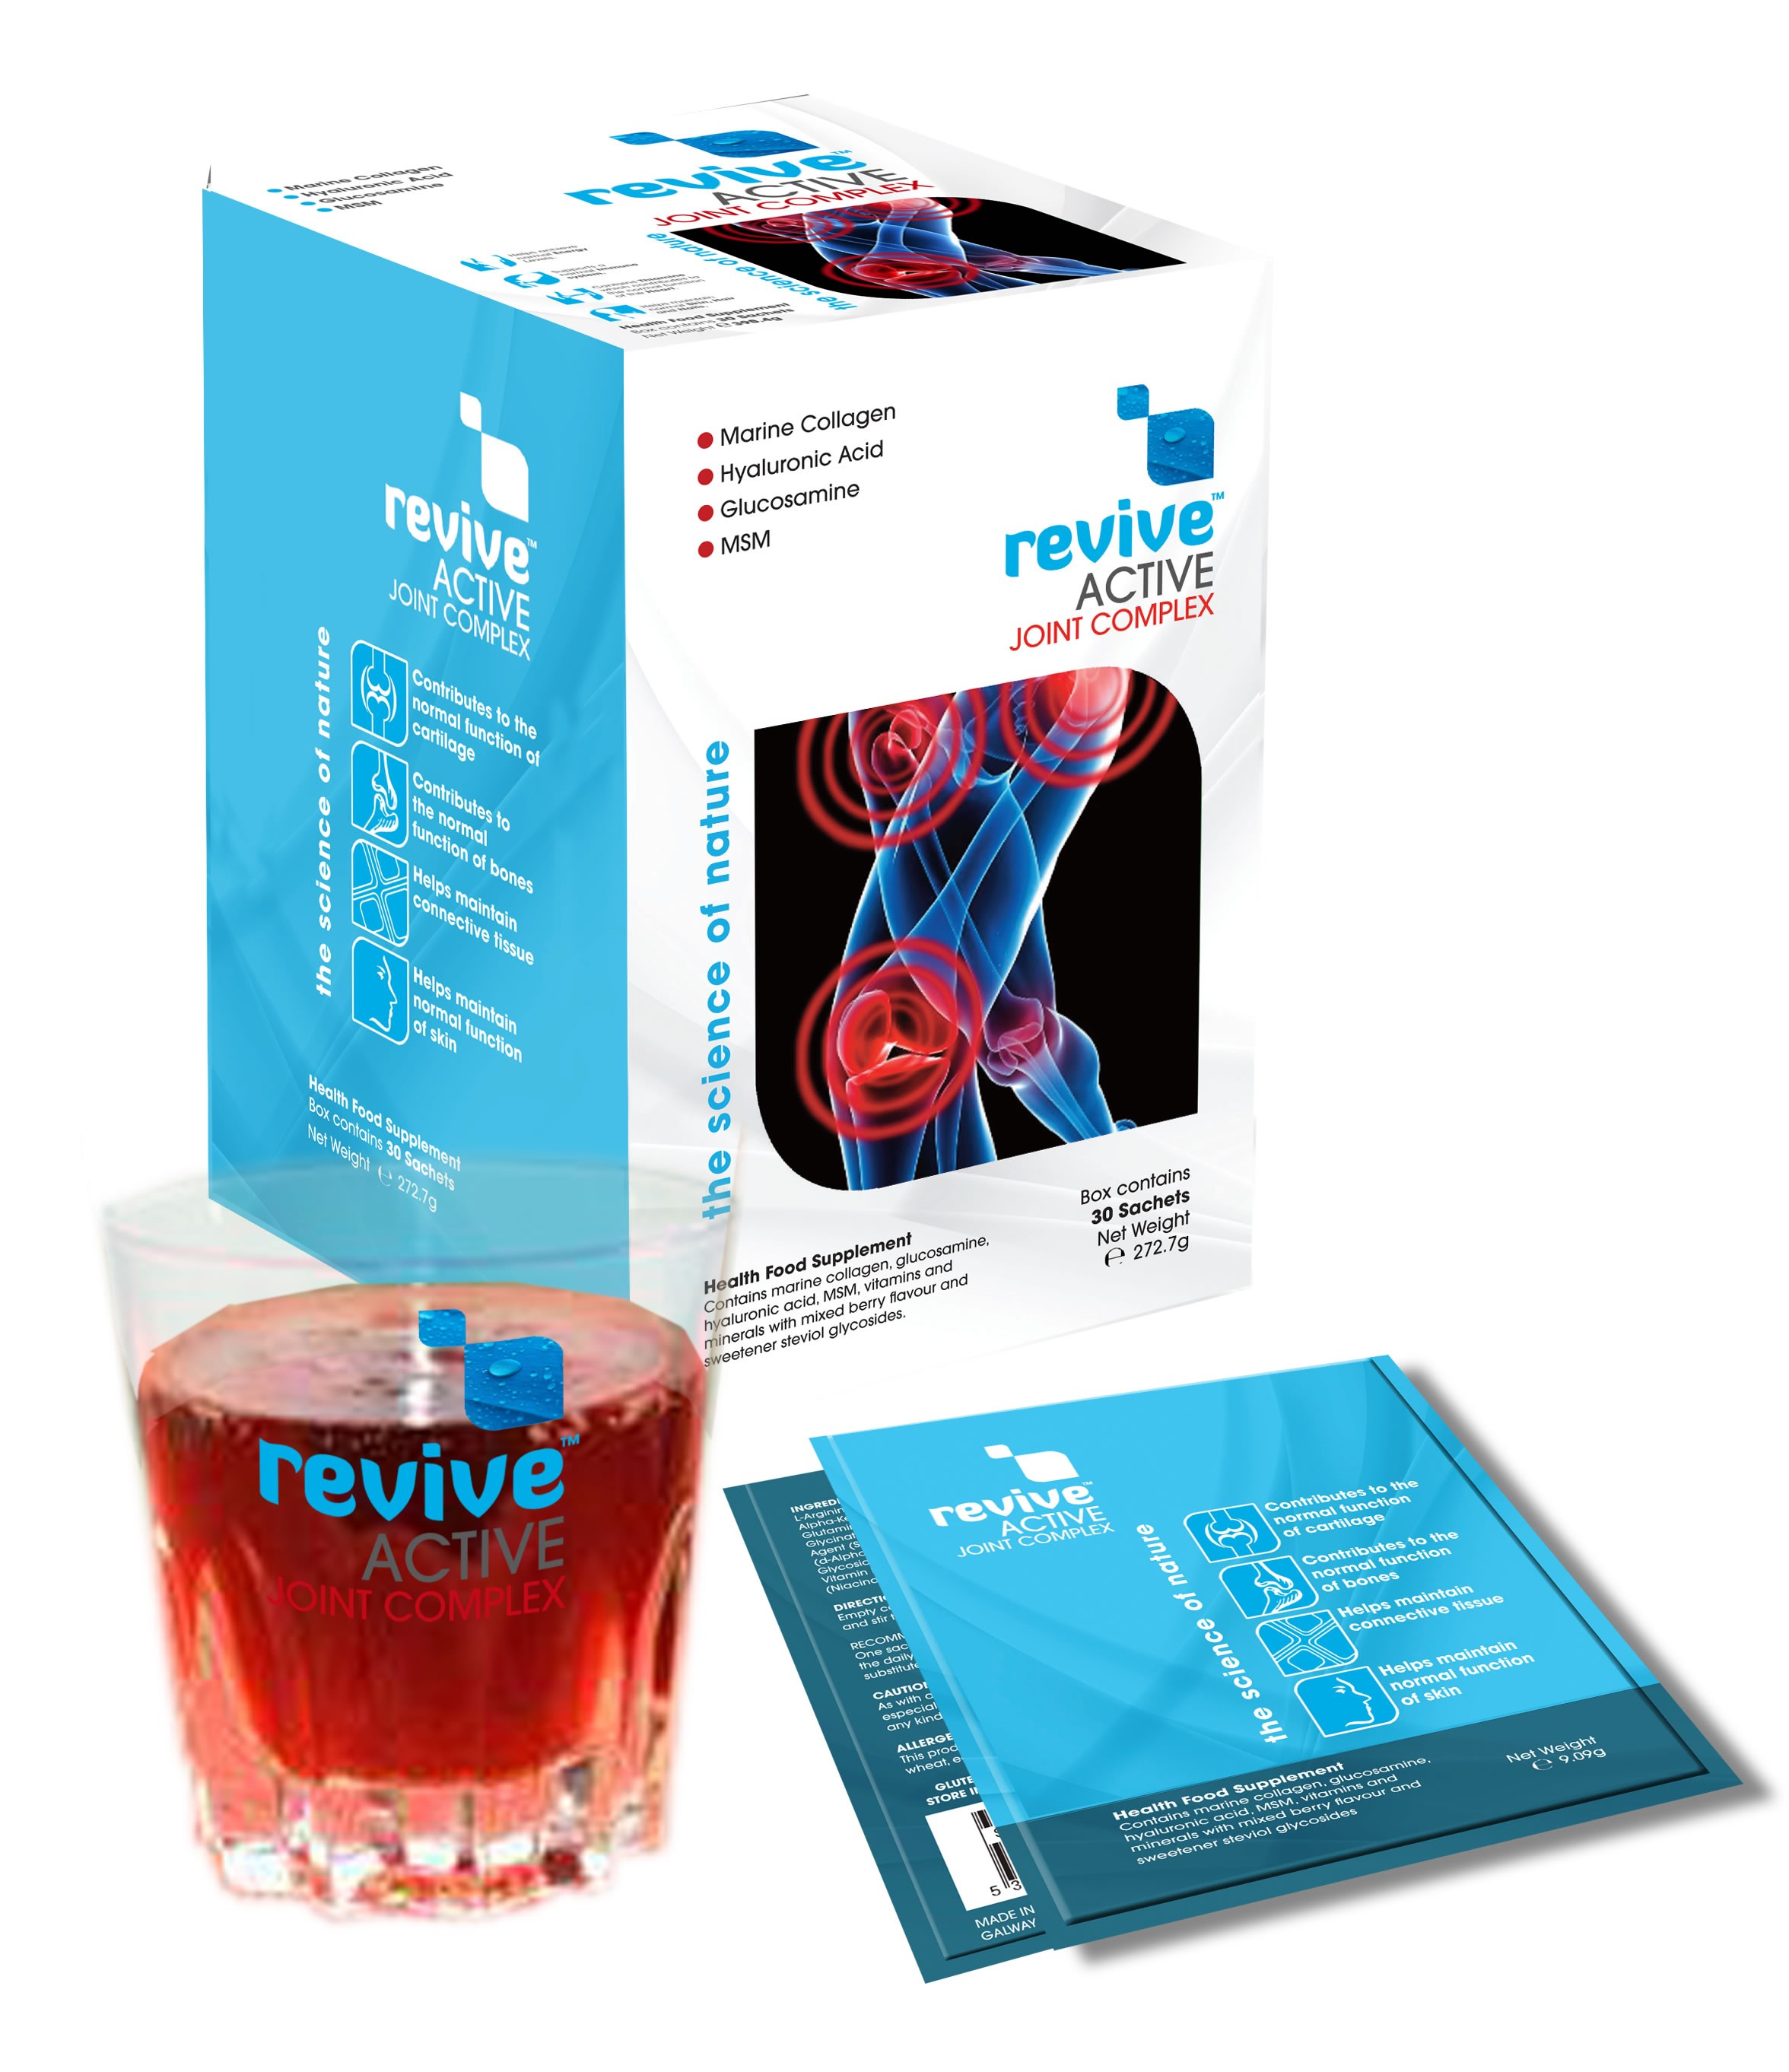 Revive Active  - A Joint Complex- A  Science of Nature - Contains Collagen, MSM, hyaluronic acid and Glucosamine